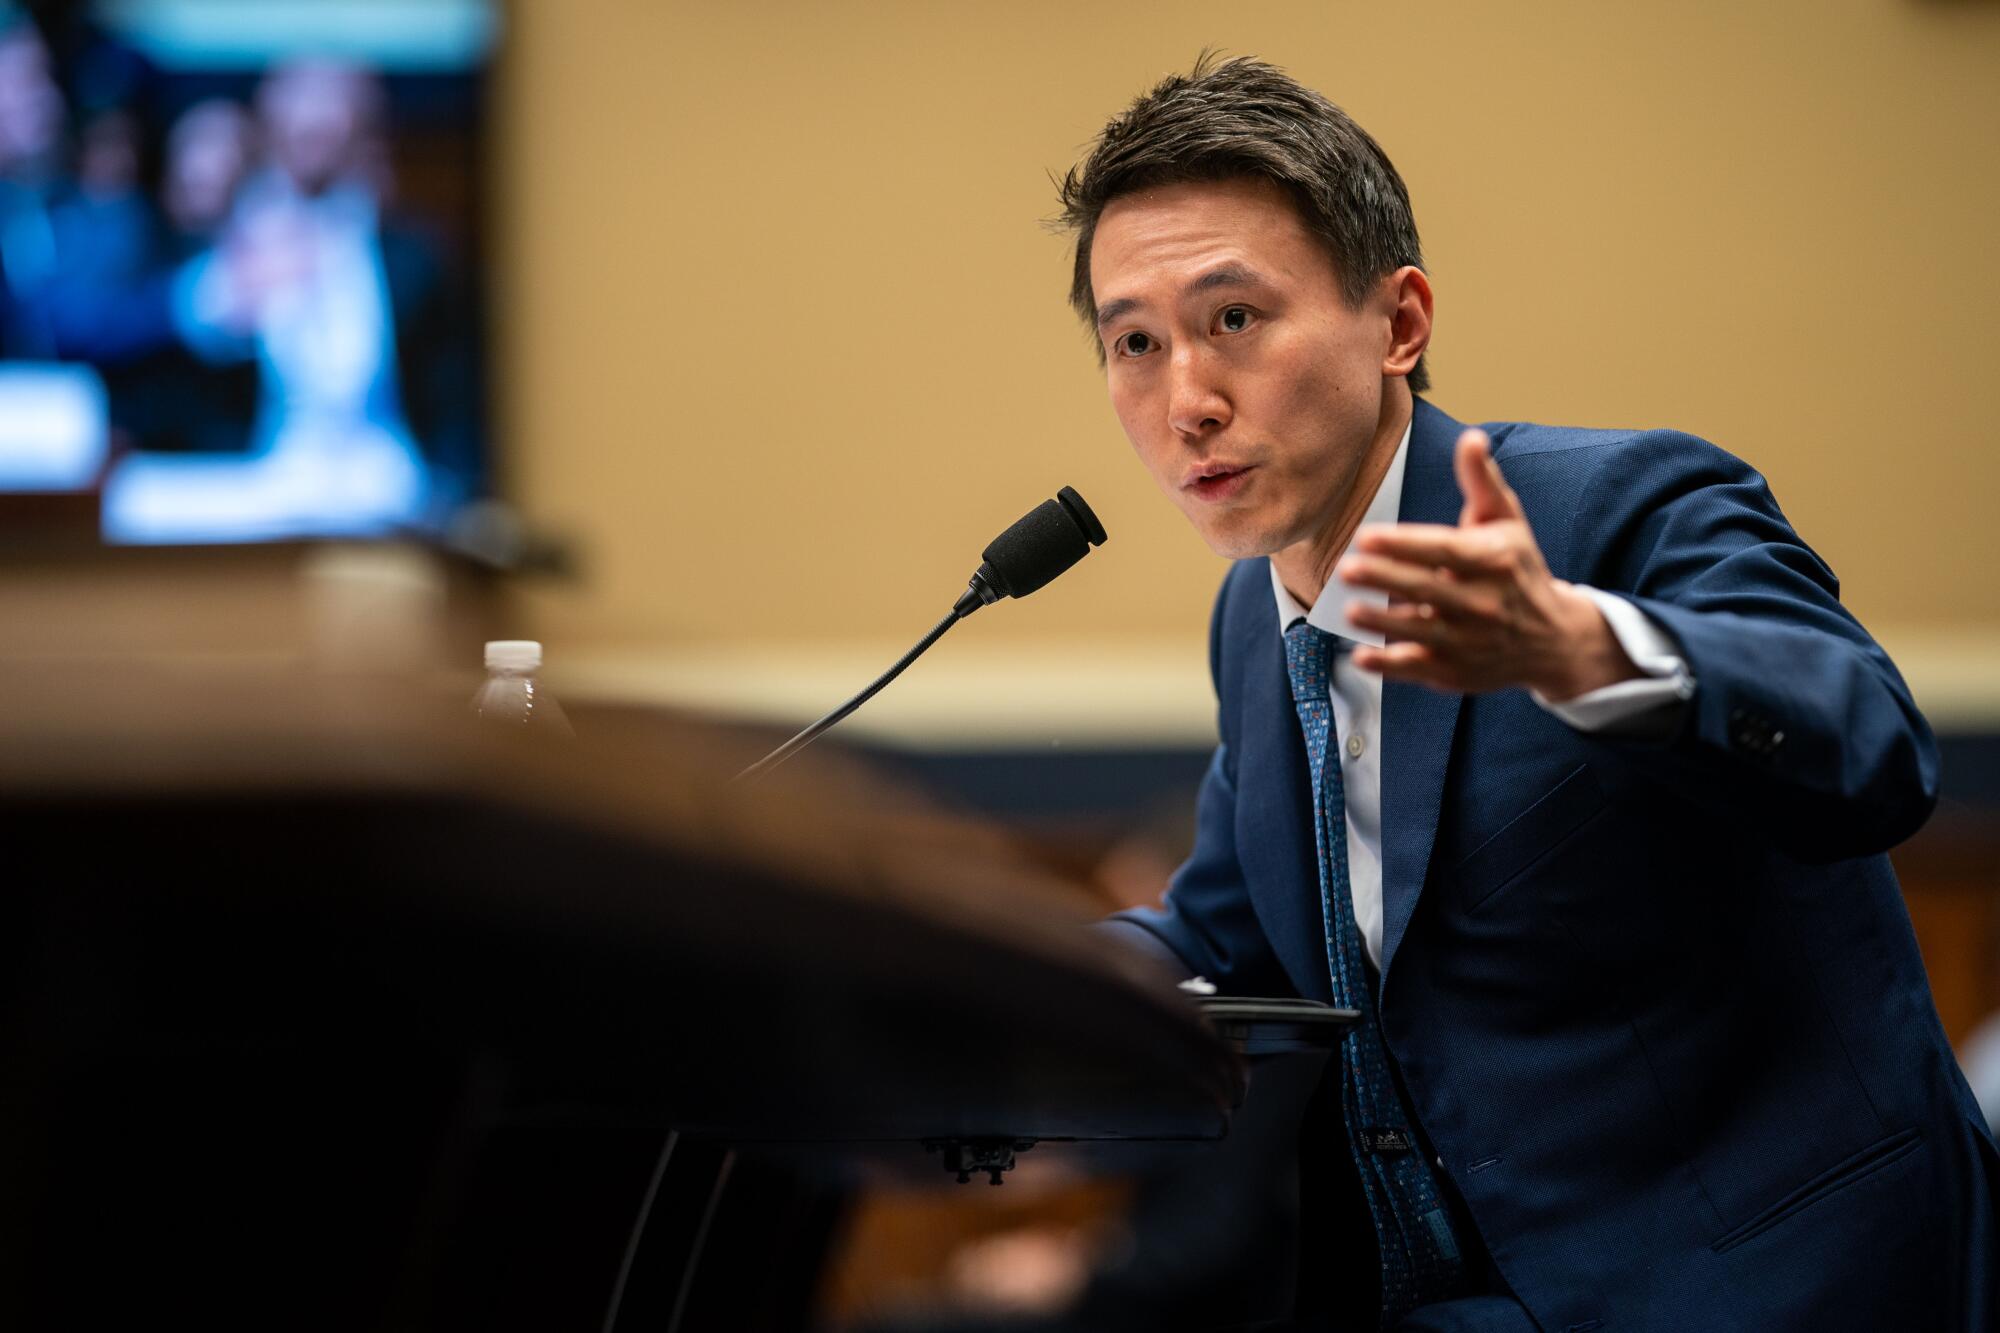  TikTok CEO Shou Zi Chew testifies before the House Energy and Commerce Committee on Thursday, March 23, 2023.